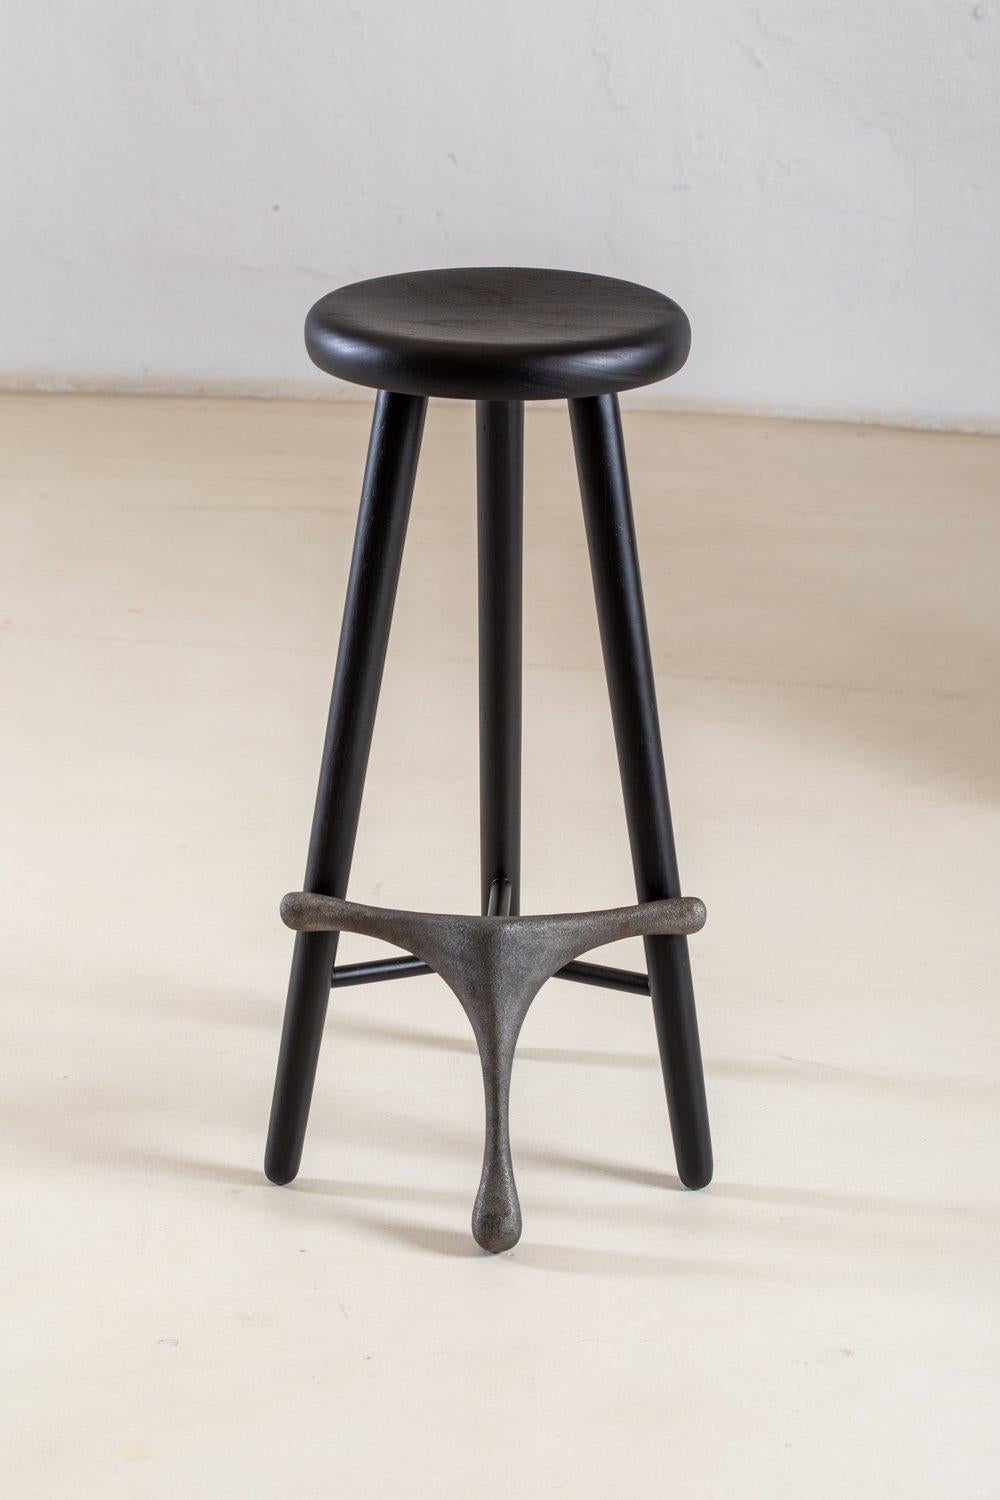 Amparo Jequitibá and Iron Stool by Alva Design
Materials: blackened solid wood (Jequitibá) and iron.
Dimensions: W 37 x D 48 x H 63 cm.

Available in different wood options (Braúna or Freijó solid wood) and footrest options (solid wood, iron or